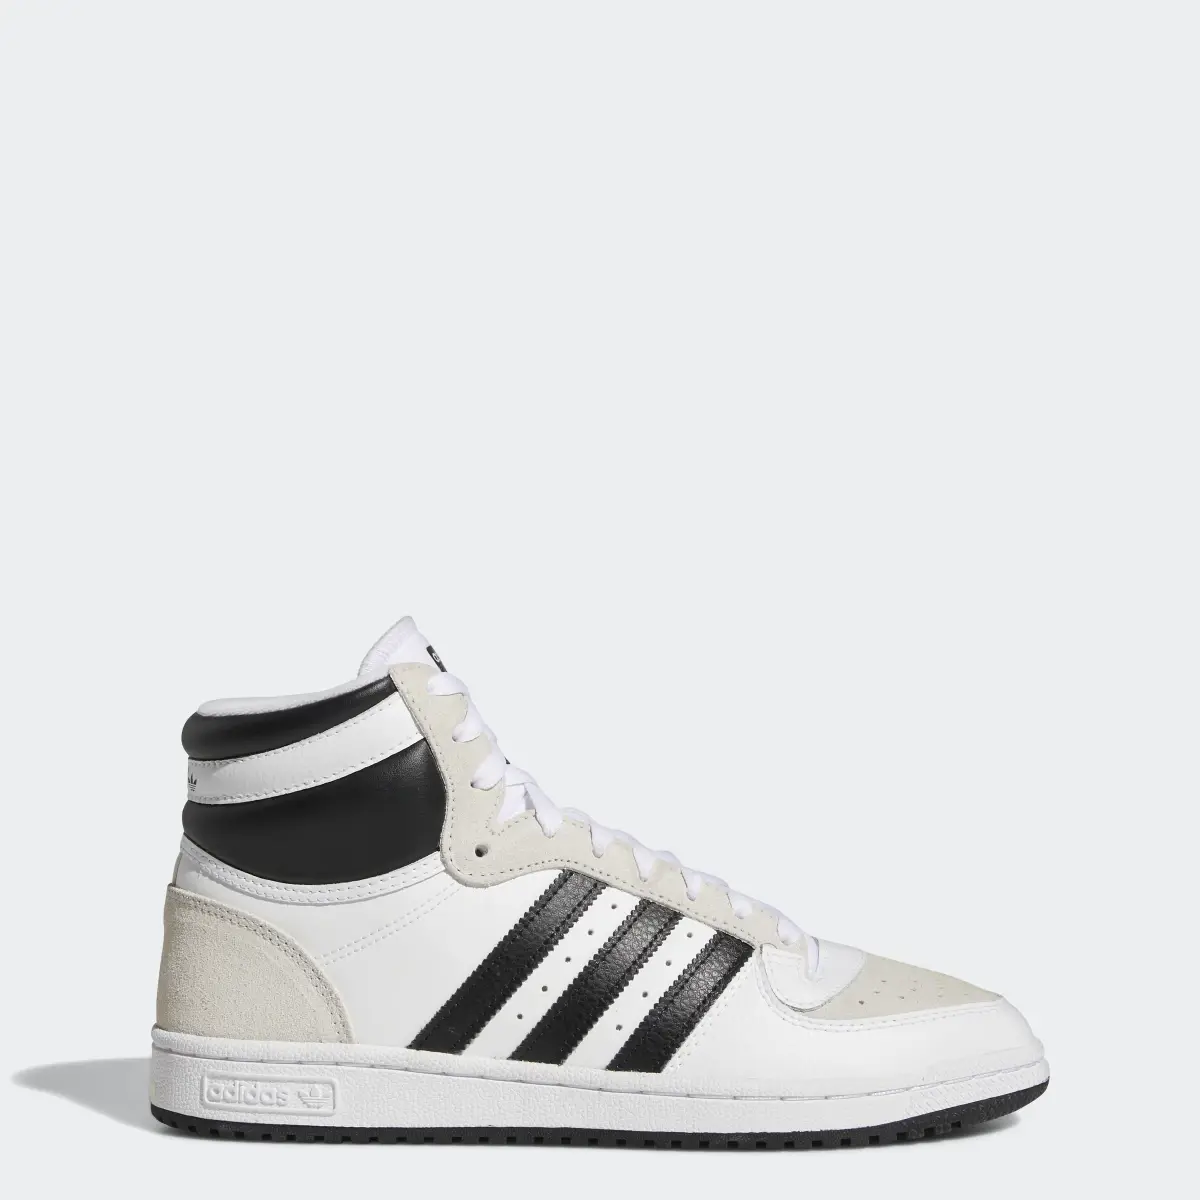 Adidas Top Ten RB Shoes. 1